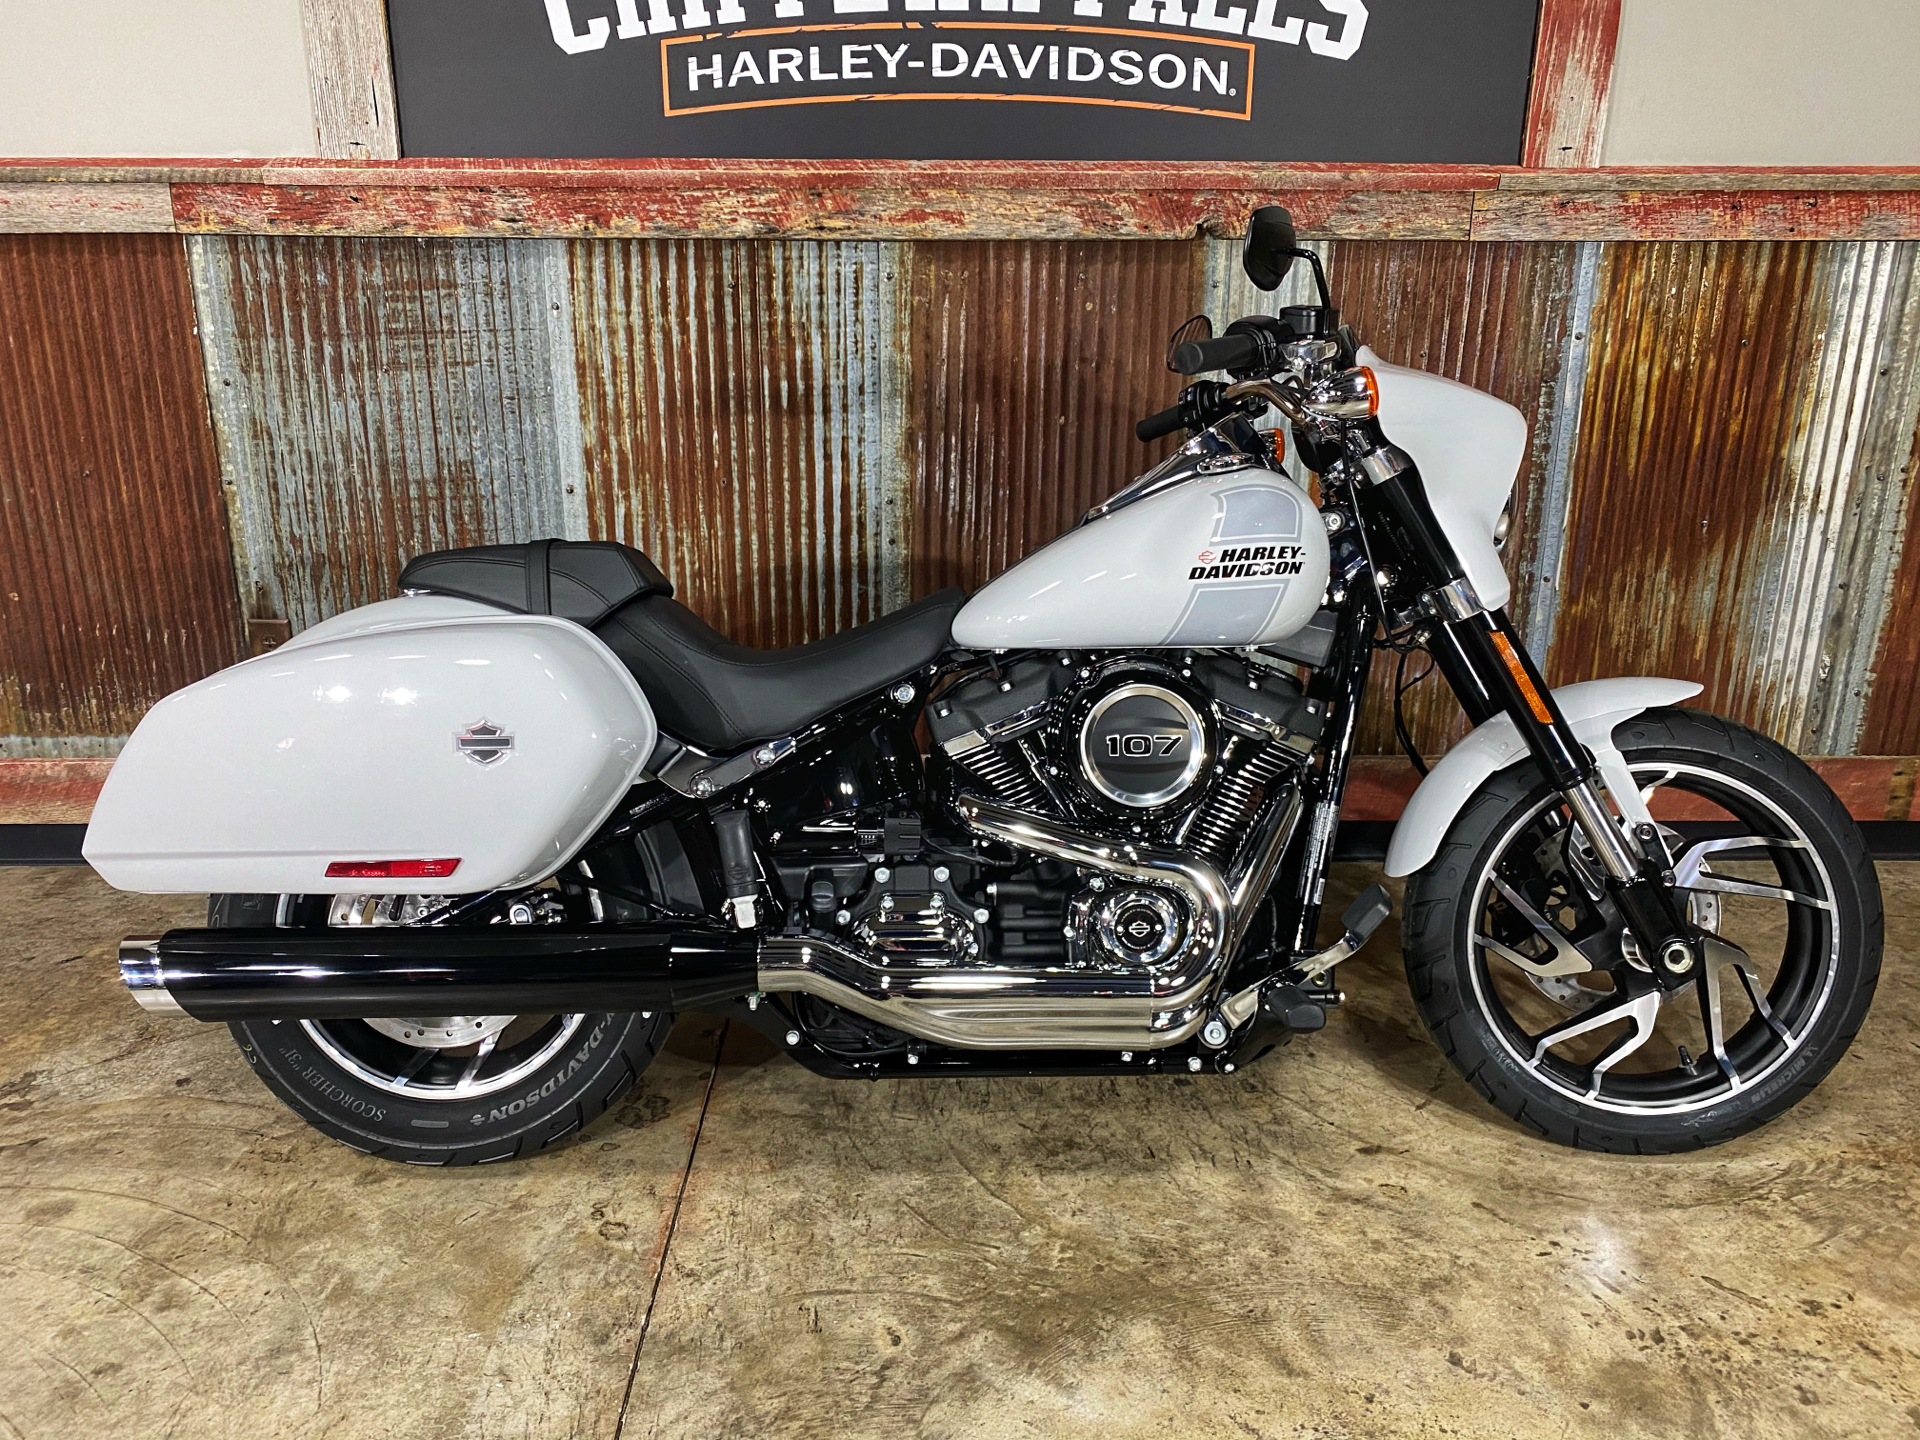 New 2021 Harley Davidson Sport Glide Stone Washed White Pearl Motorcycles In Chippewa Falls Wi Fx012222